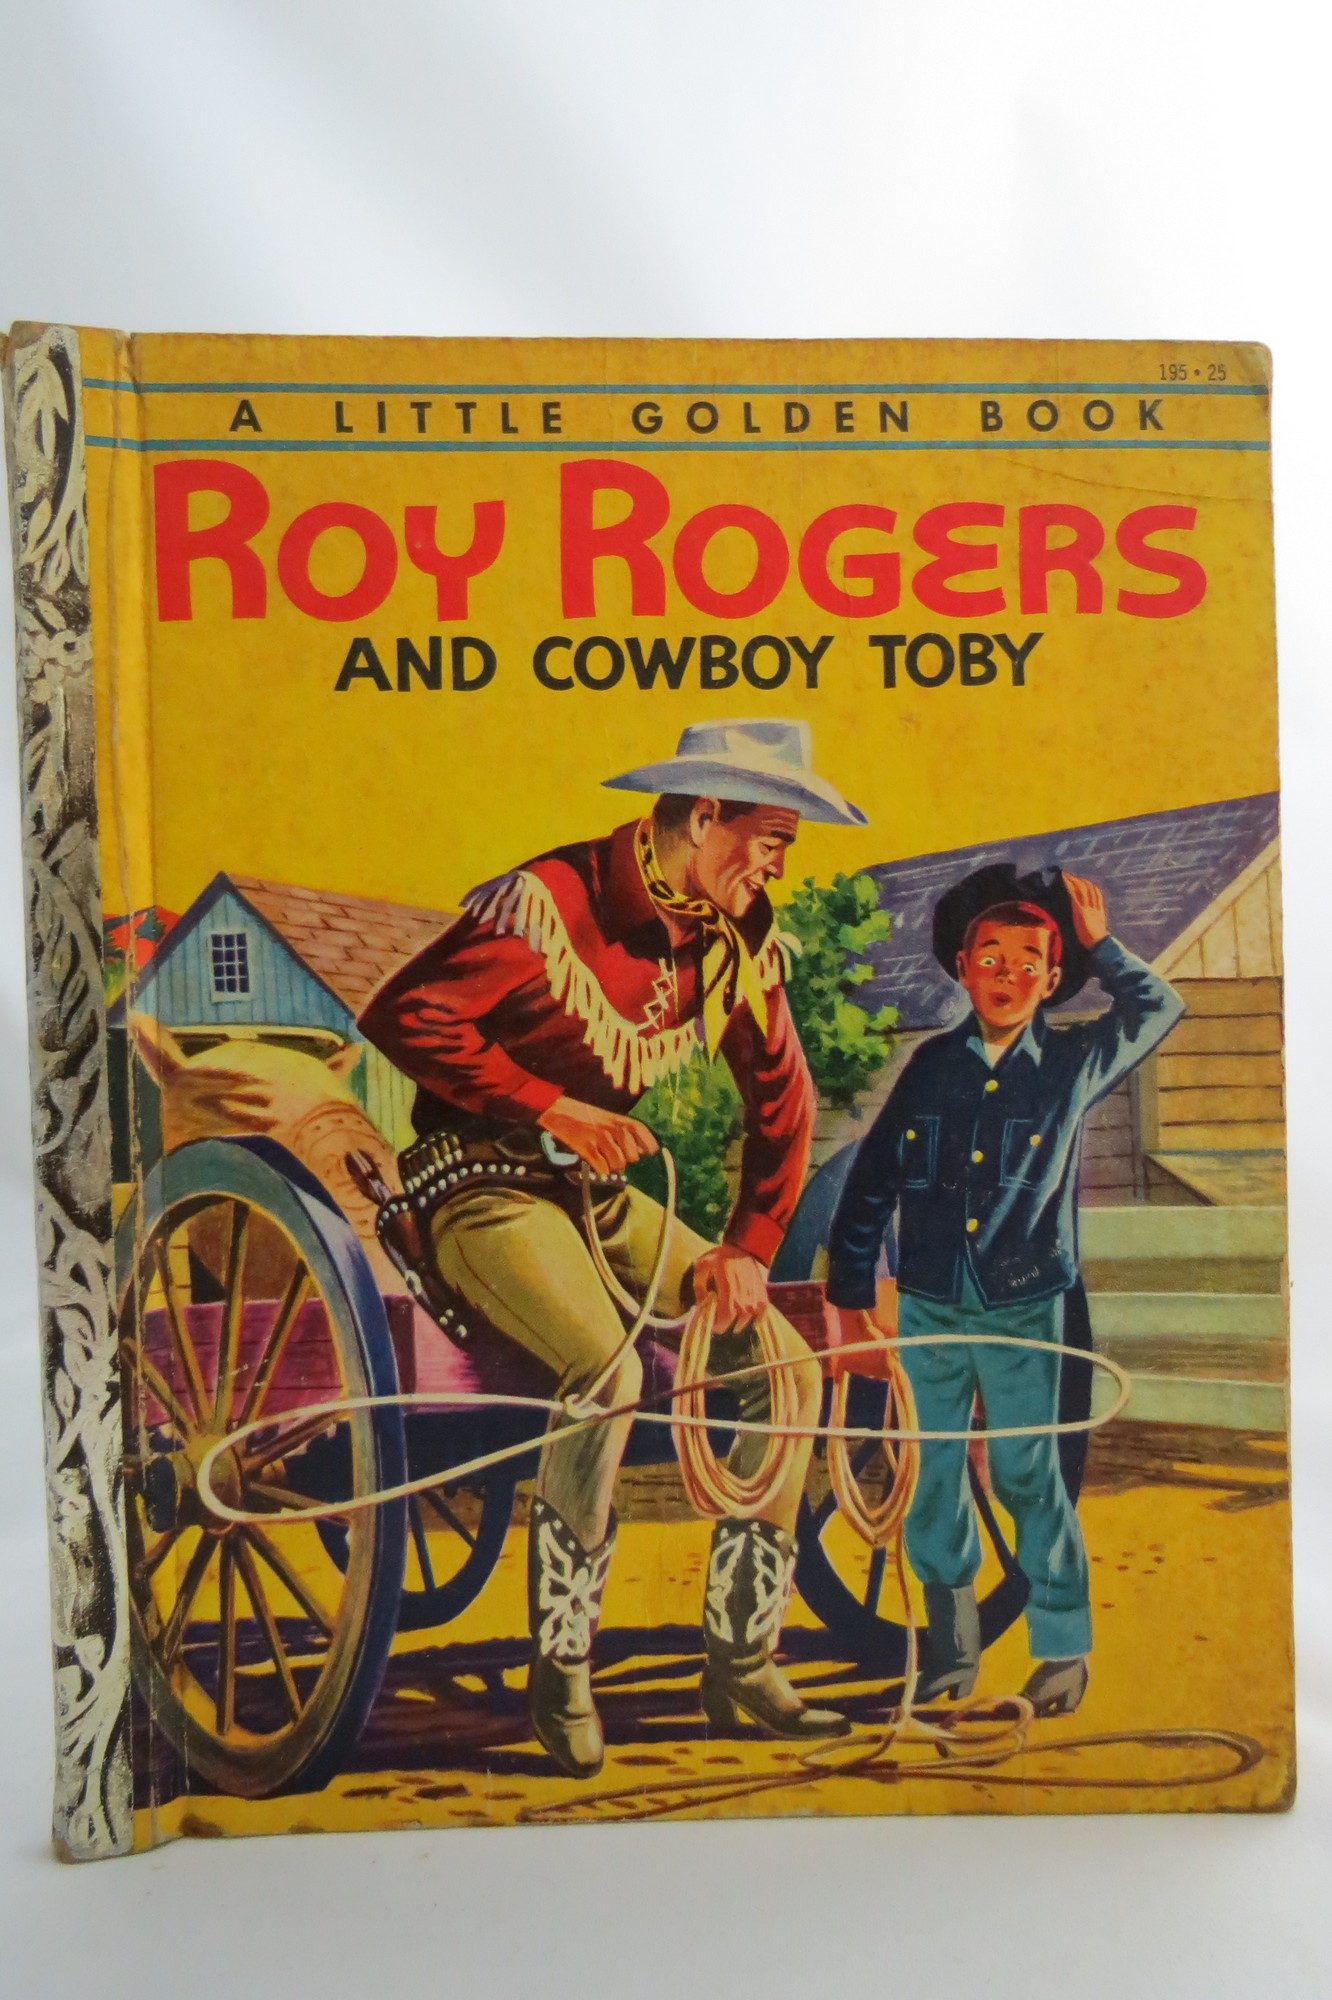 ROY ROGERS AND COWBOY TOBY (A LITTLE GOLDEN BOOK)